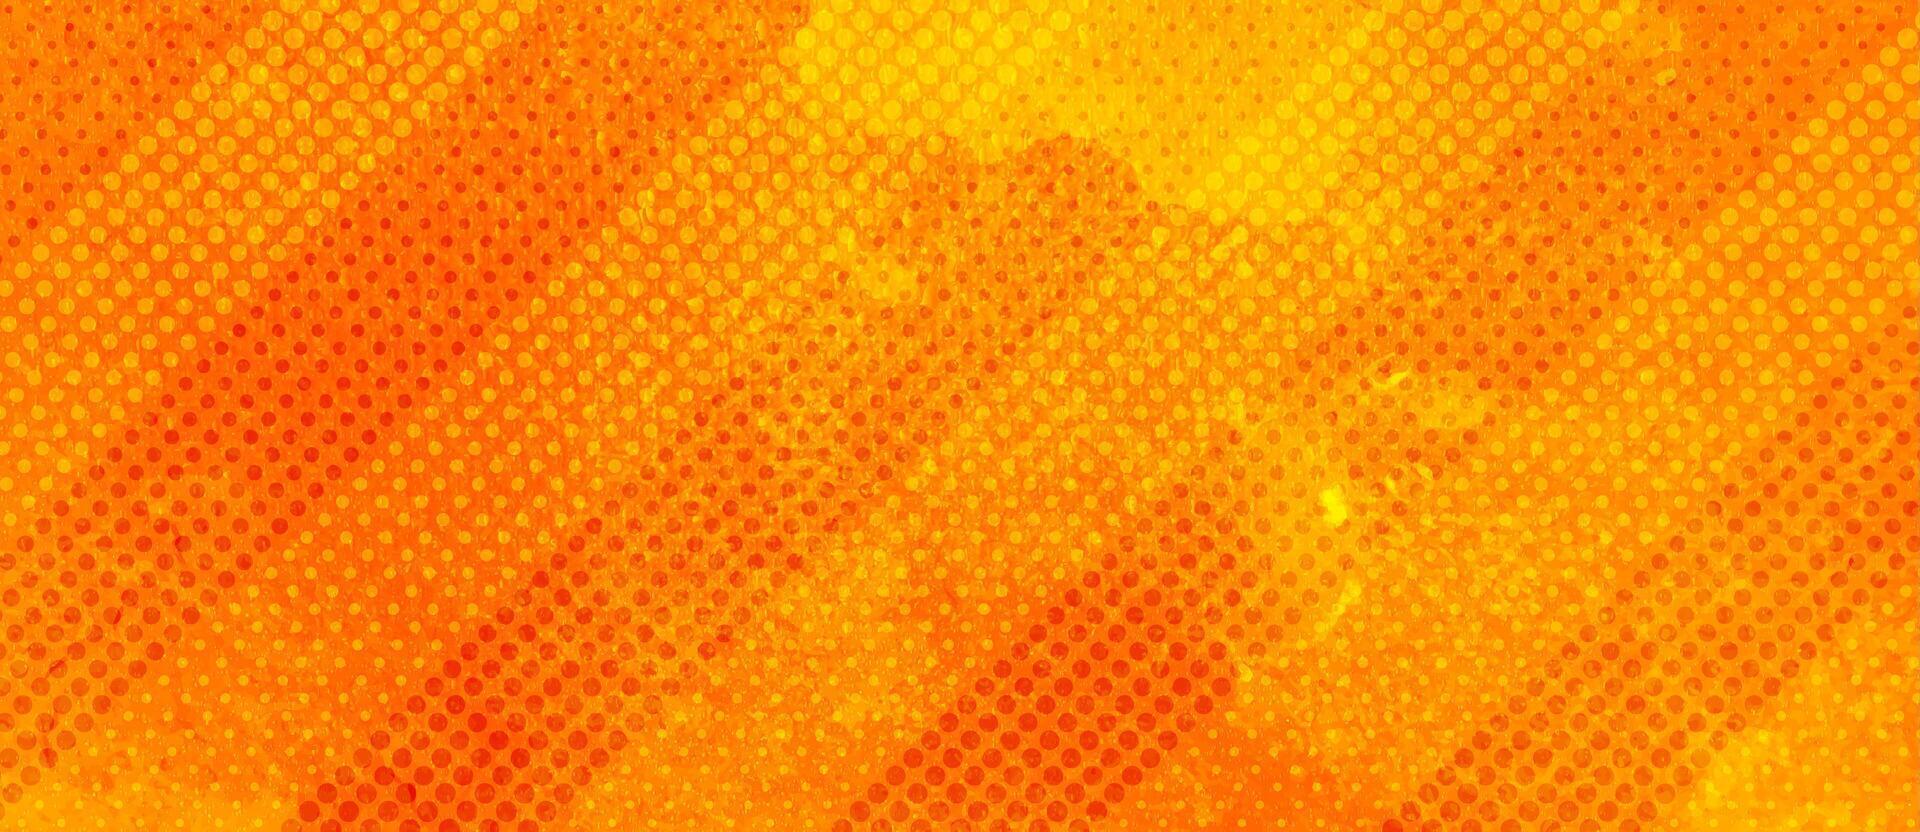 Abstract orange dotted pattern geometric grunge background vector